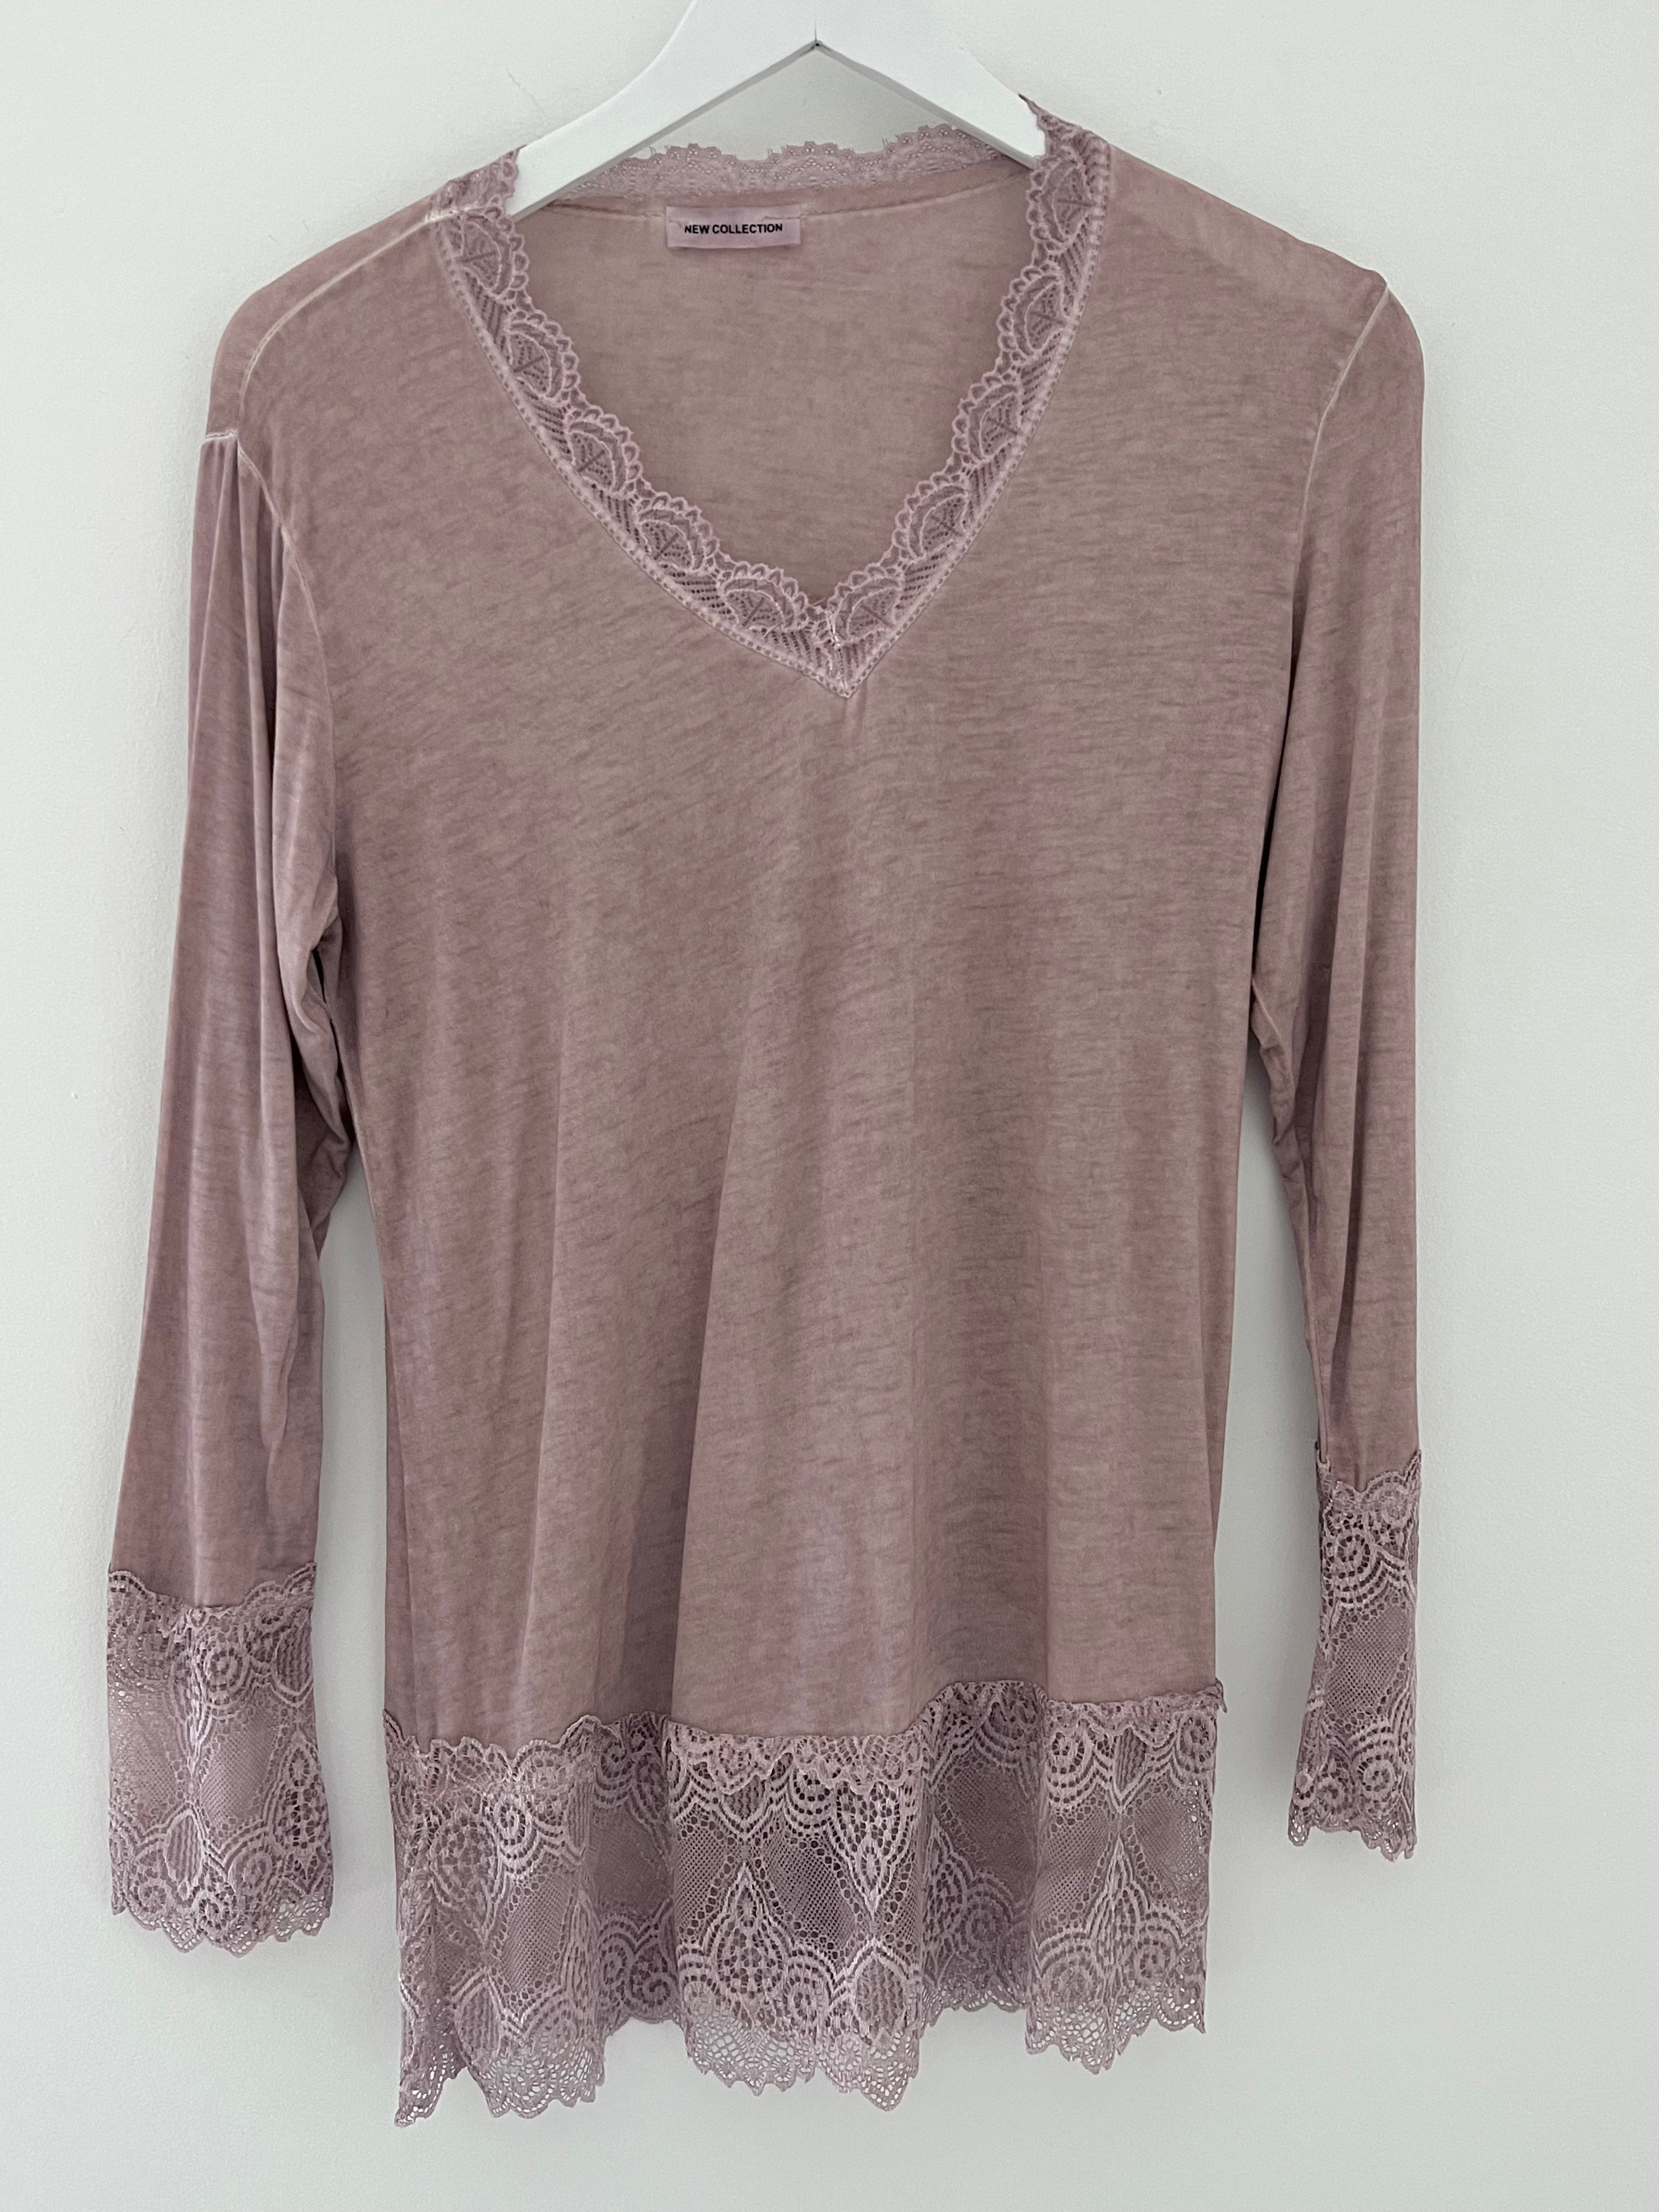 Luxe Base Top with Lace Trim in Soft Pink